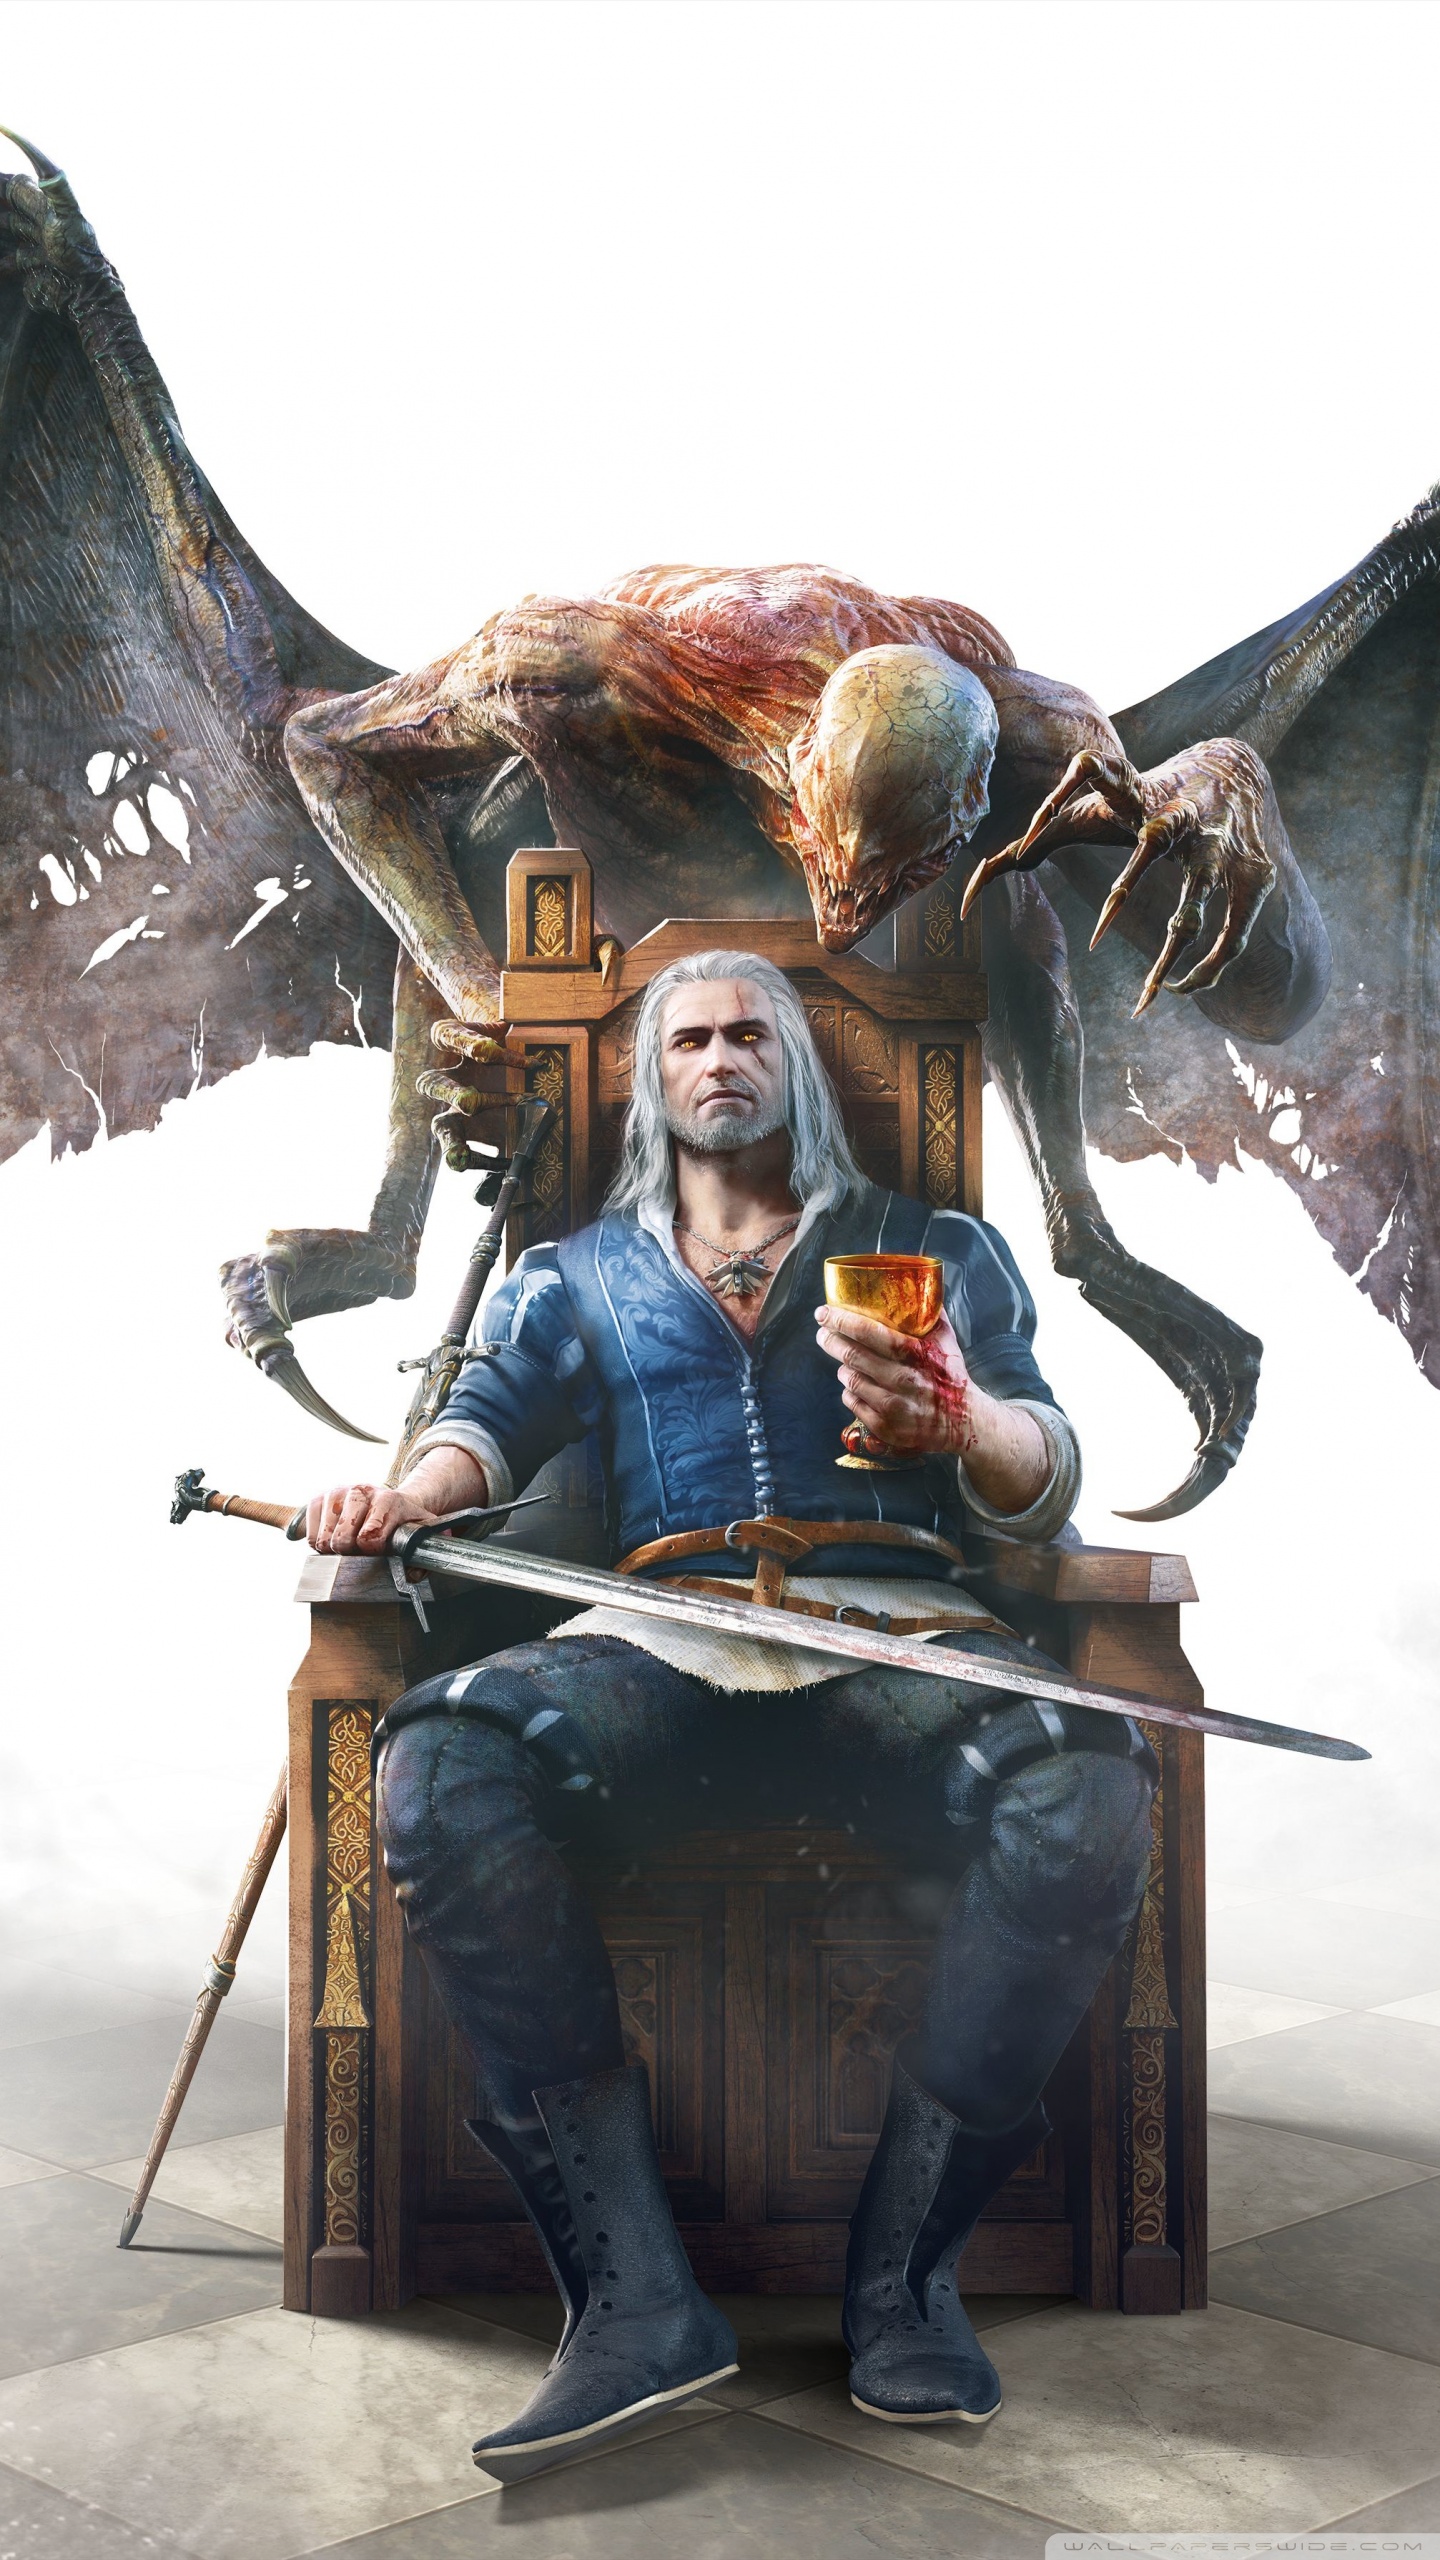 the witcher 3 blood and wine wallpaper,art,illustration,fictional character,sculpture,games